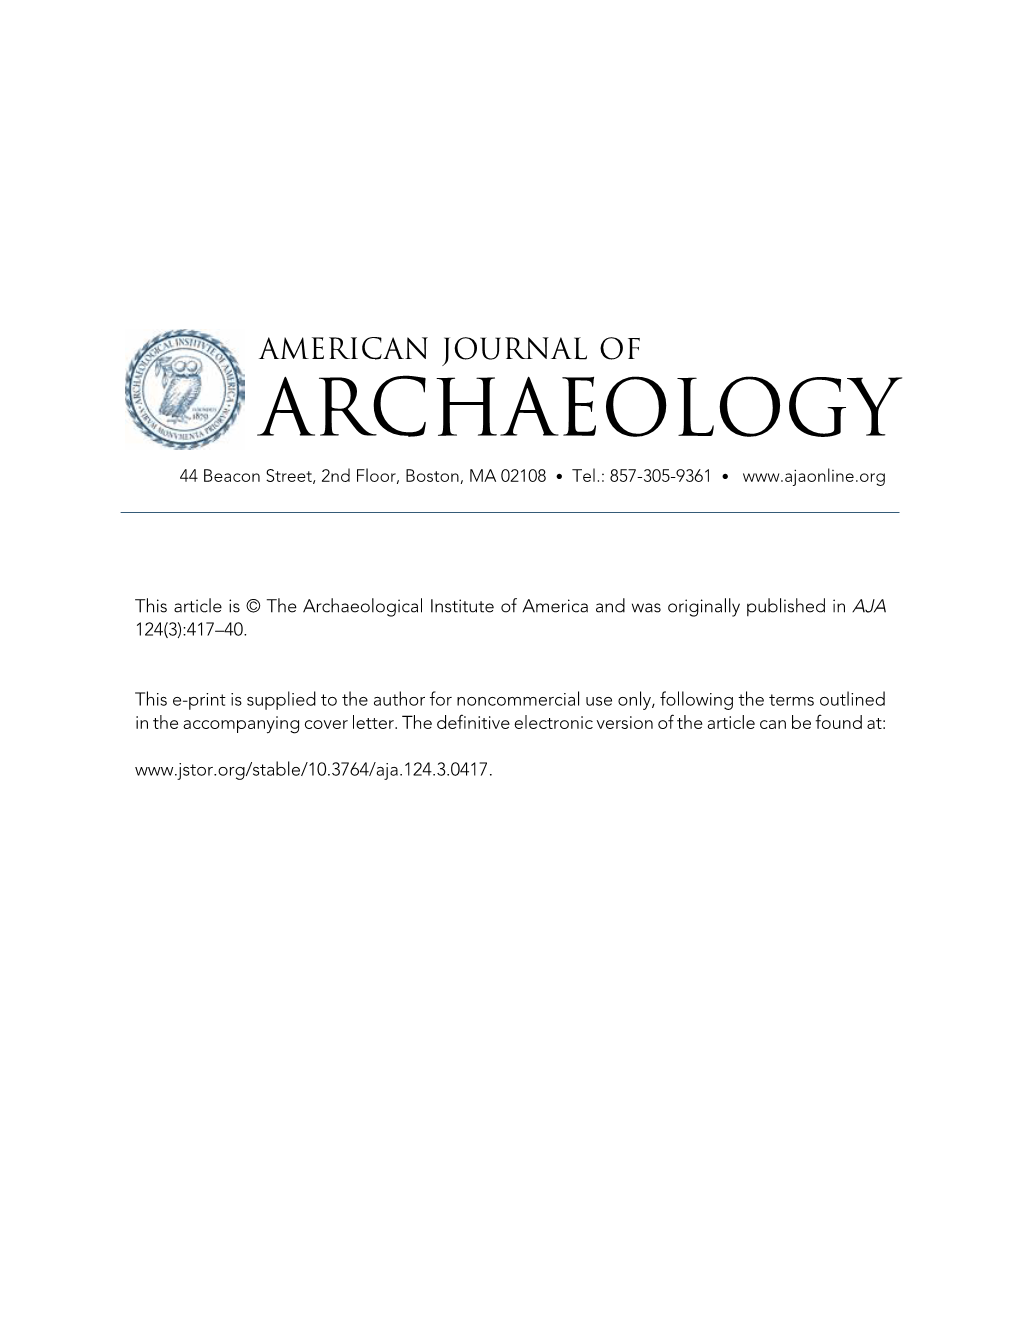 Reassessing the Capacities of Entertainment Structures in the Roman Empire J.W